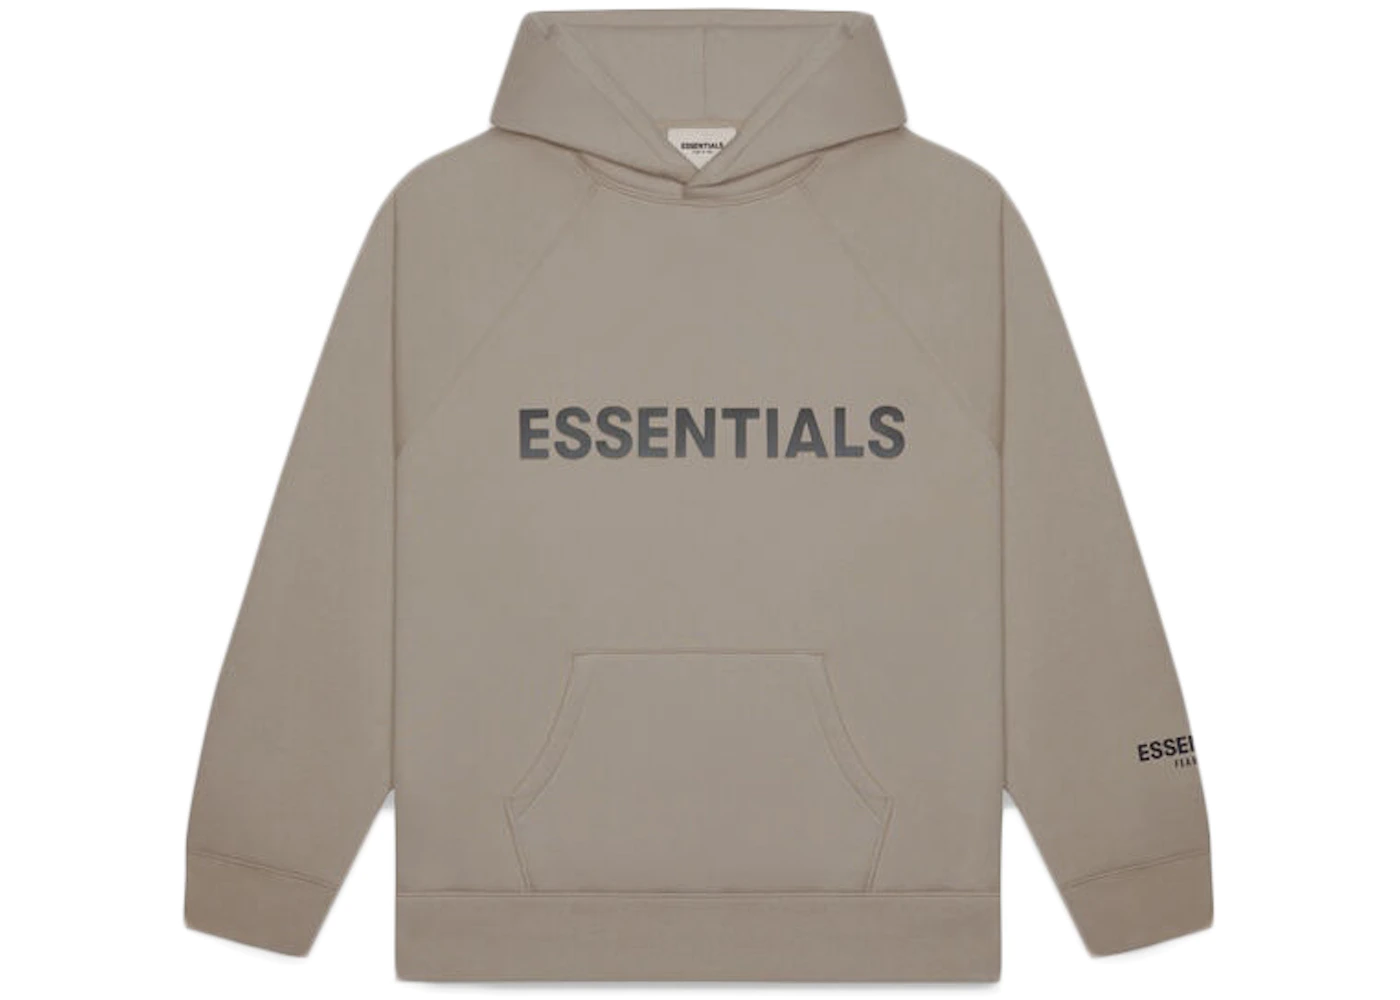 What are the basic features of Essentials Hoodie